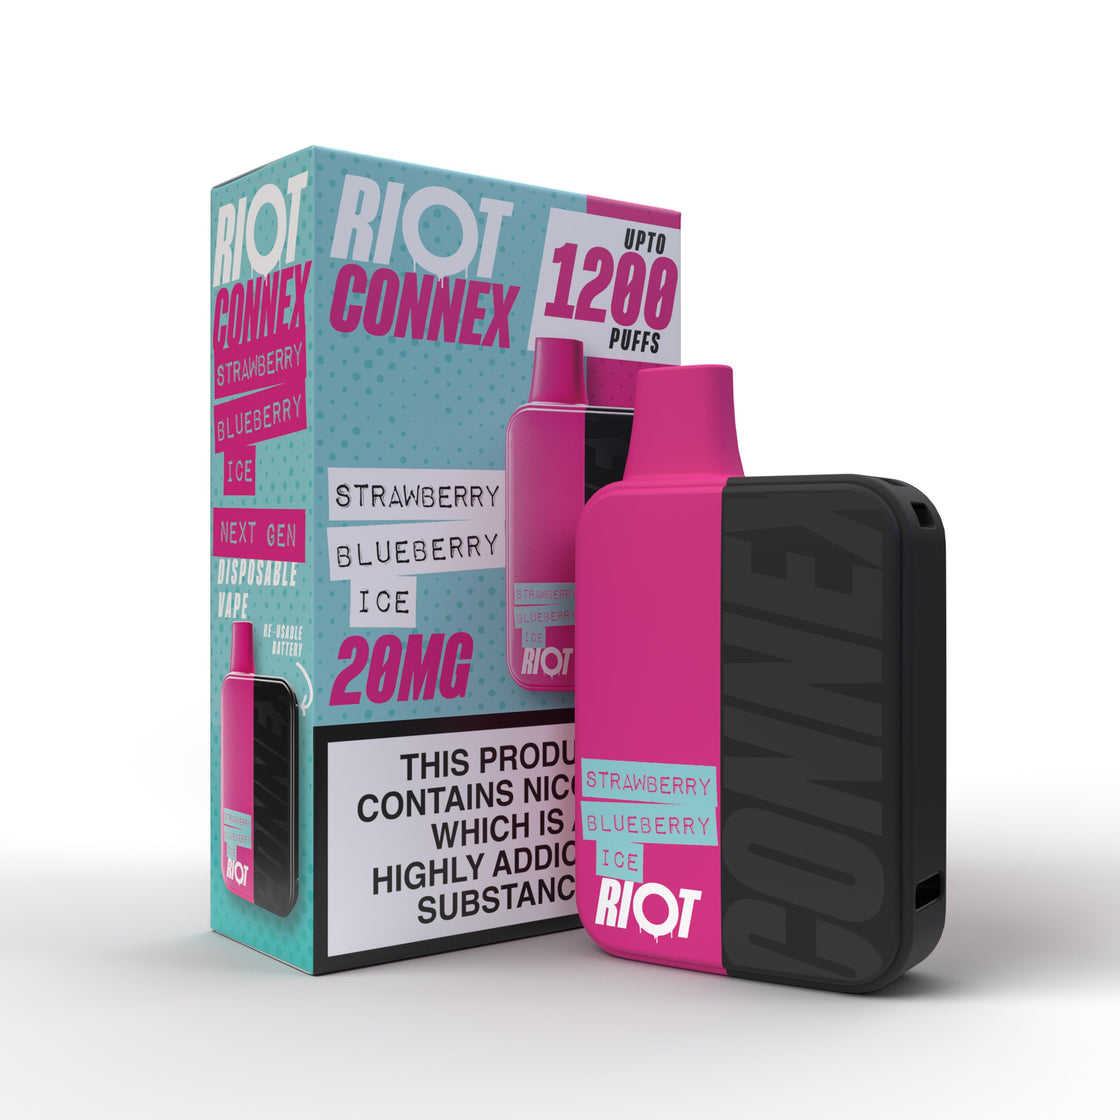 STRAWBERRY BLUEBERRY ICE - RIOT CONNEX - DISPOSABLE POD SYSTEM KIT - 1200 PUFFS BY RIOT SQUAD - Vapeslough